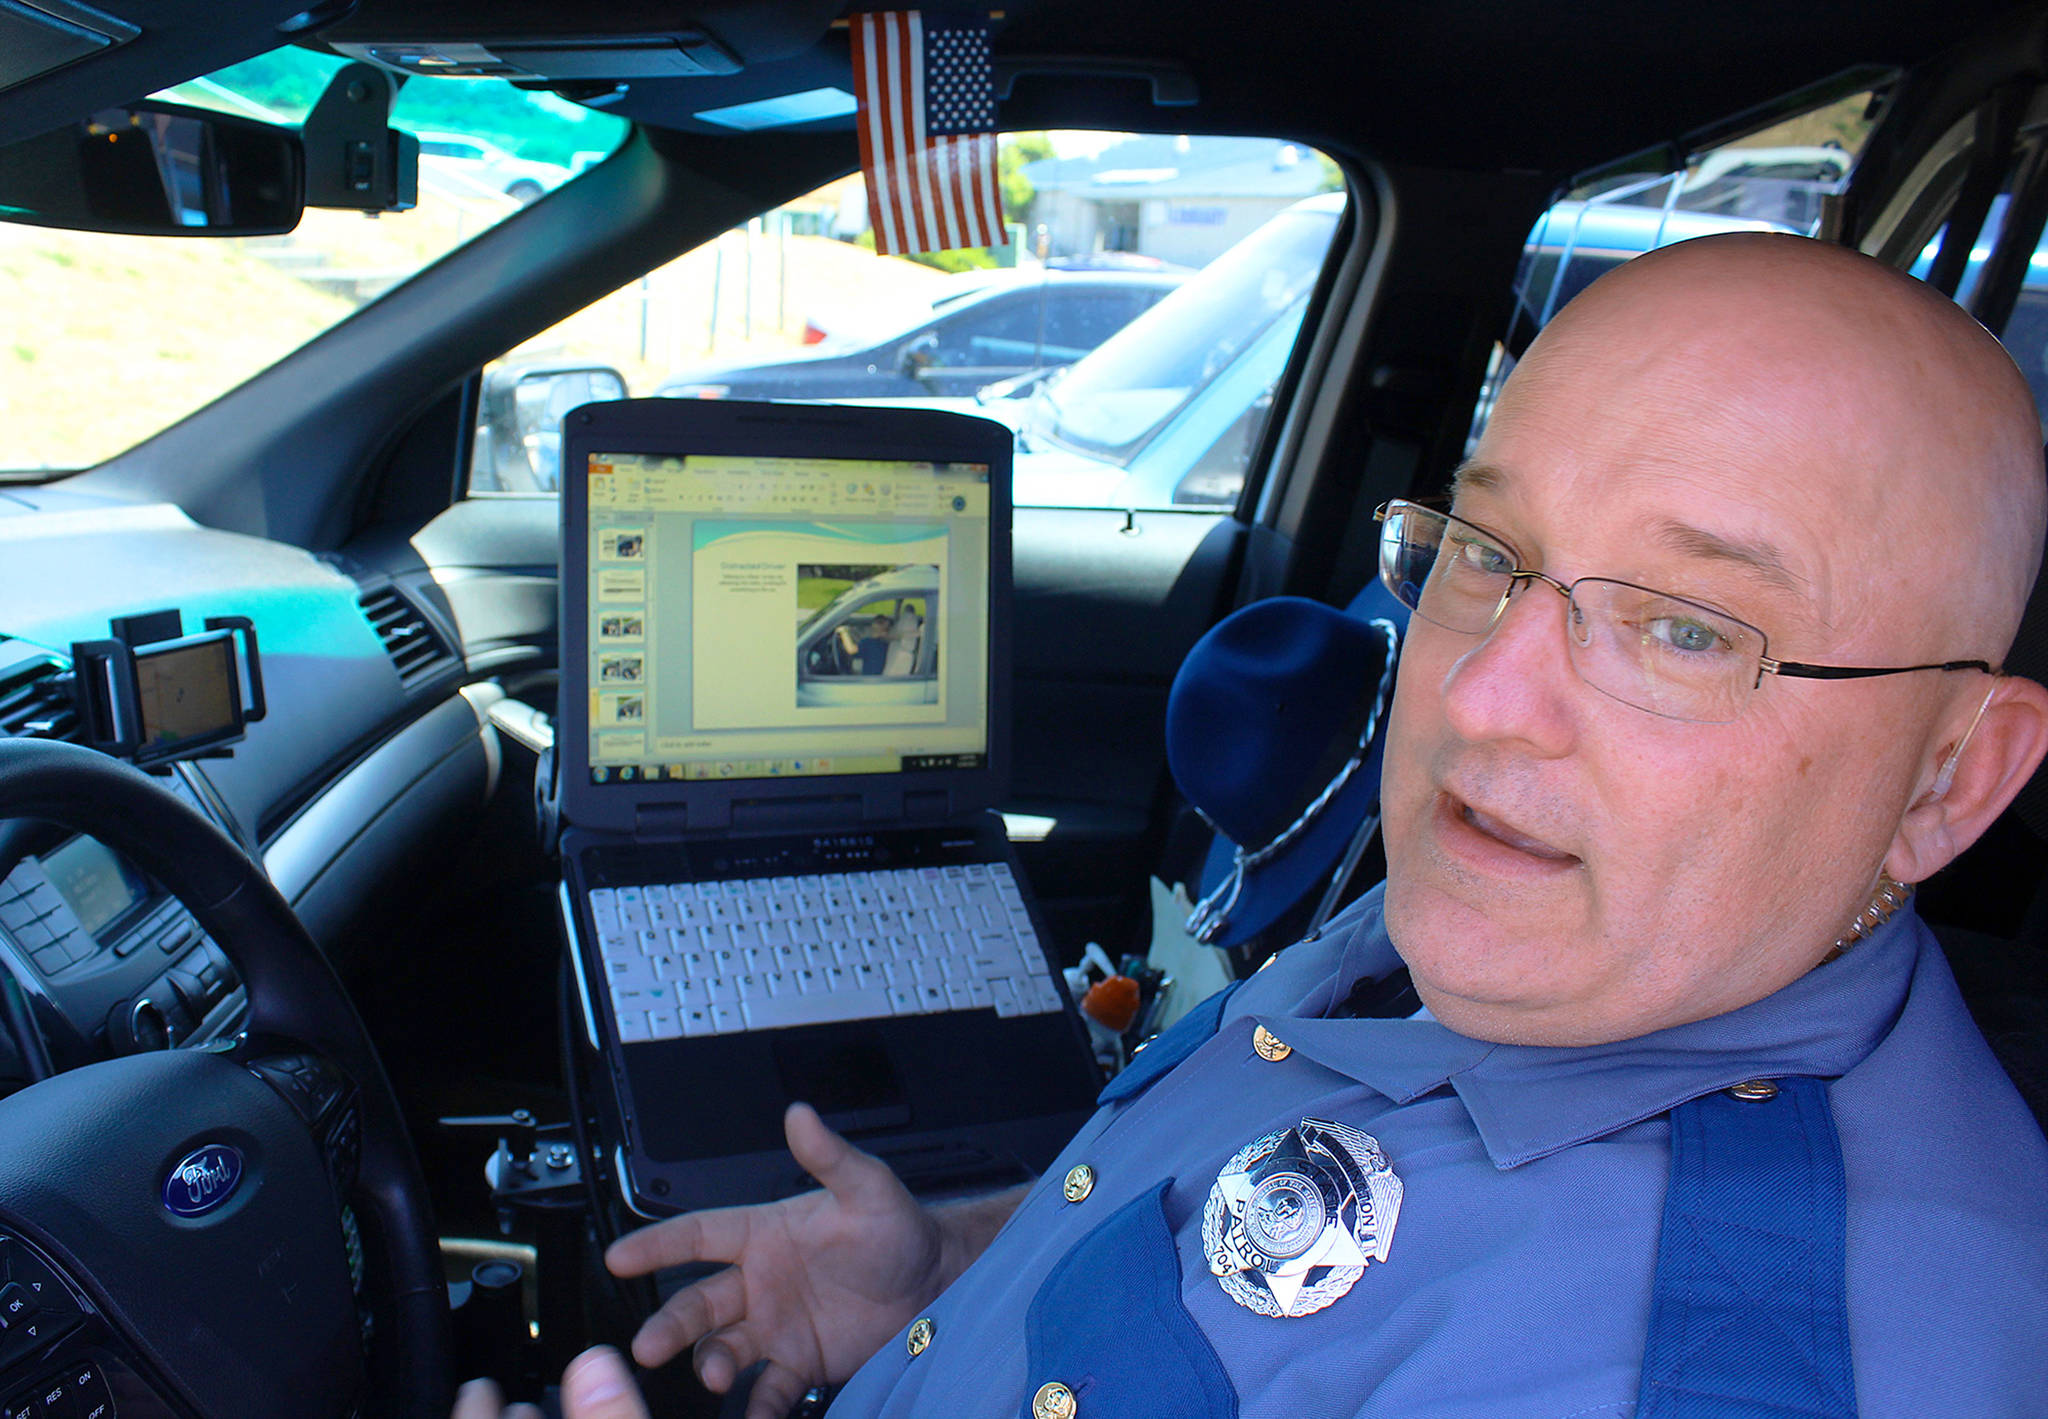 Beginning Sunday it’s illegal under a new state law to have a cell phone or any electronic device in your hand while driving. State trooper Dave Martin advises: “Just focus on getting from point A to point B.” Photo by Patricia Guthrie/Whidbey News-Times